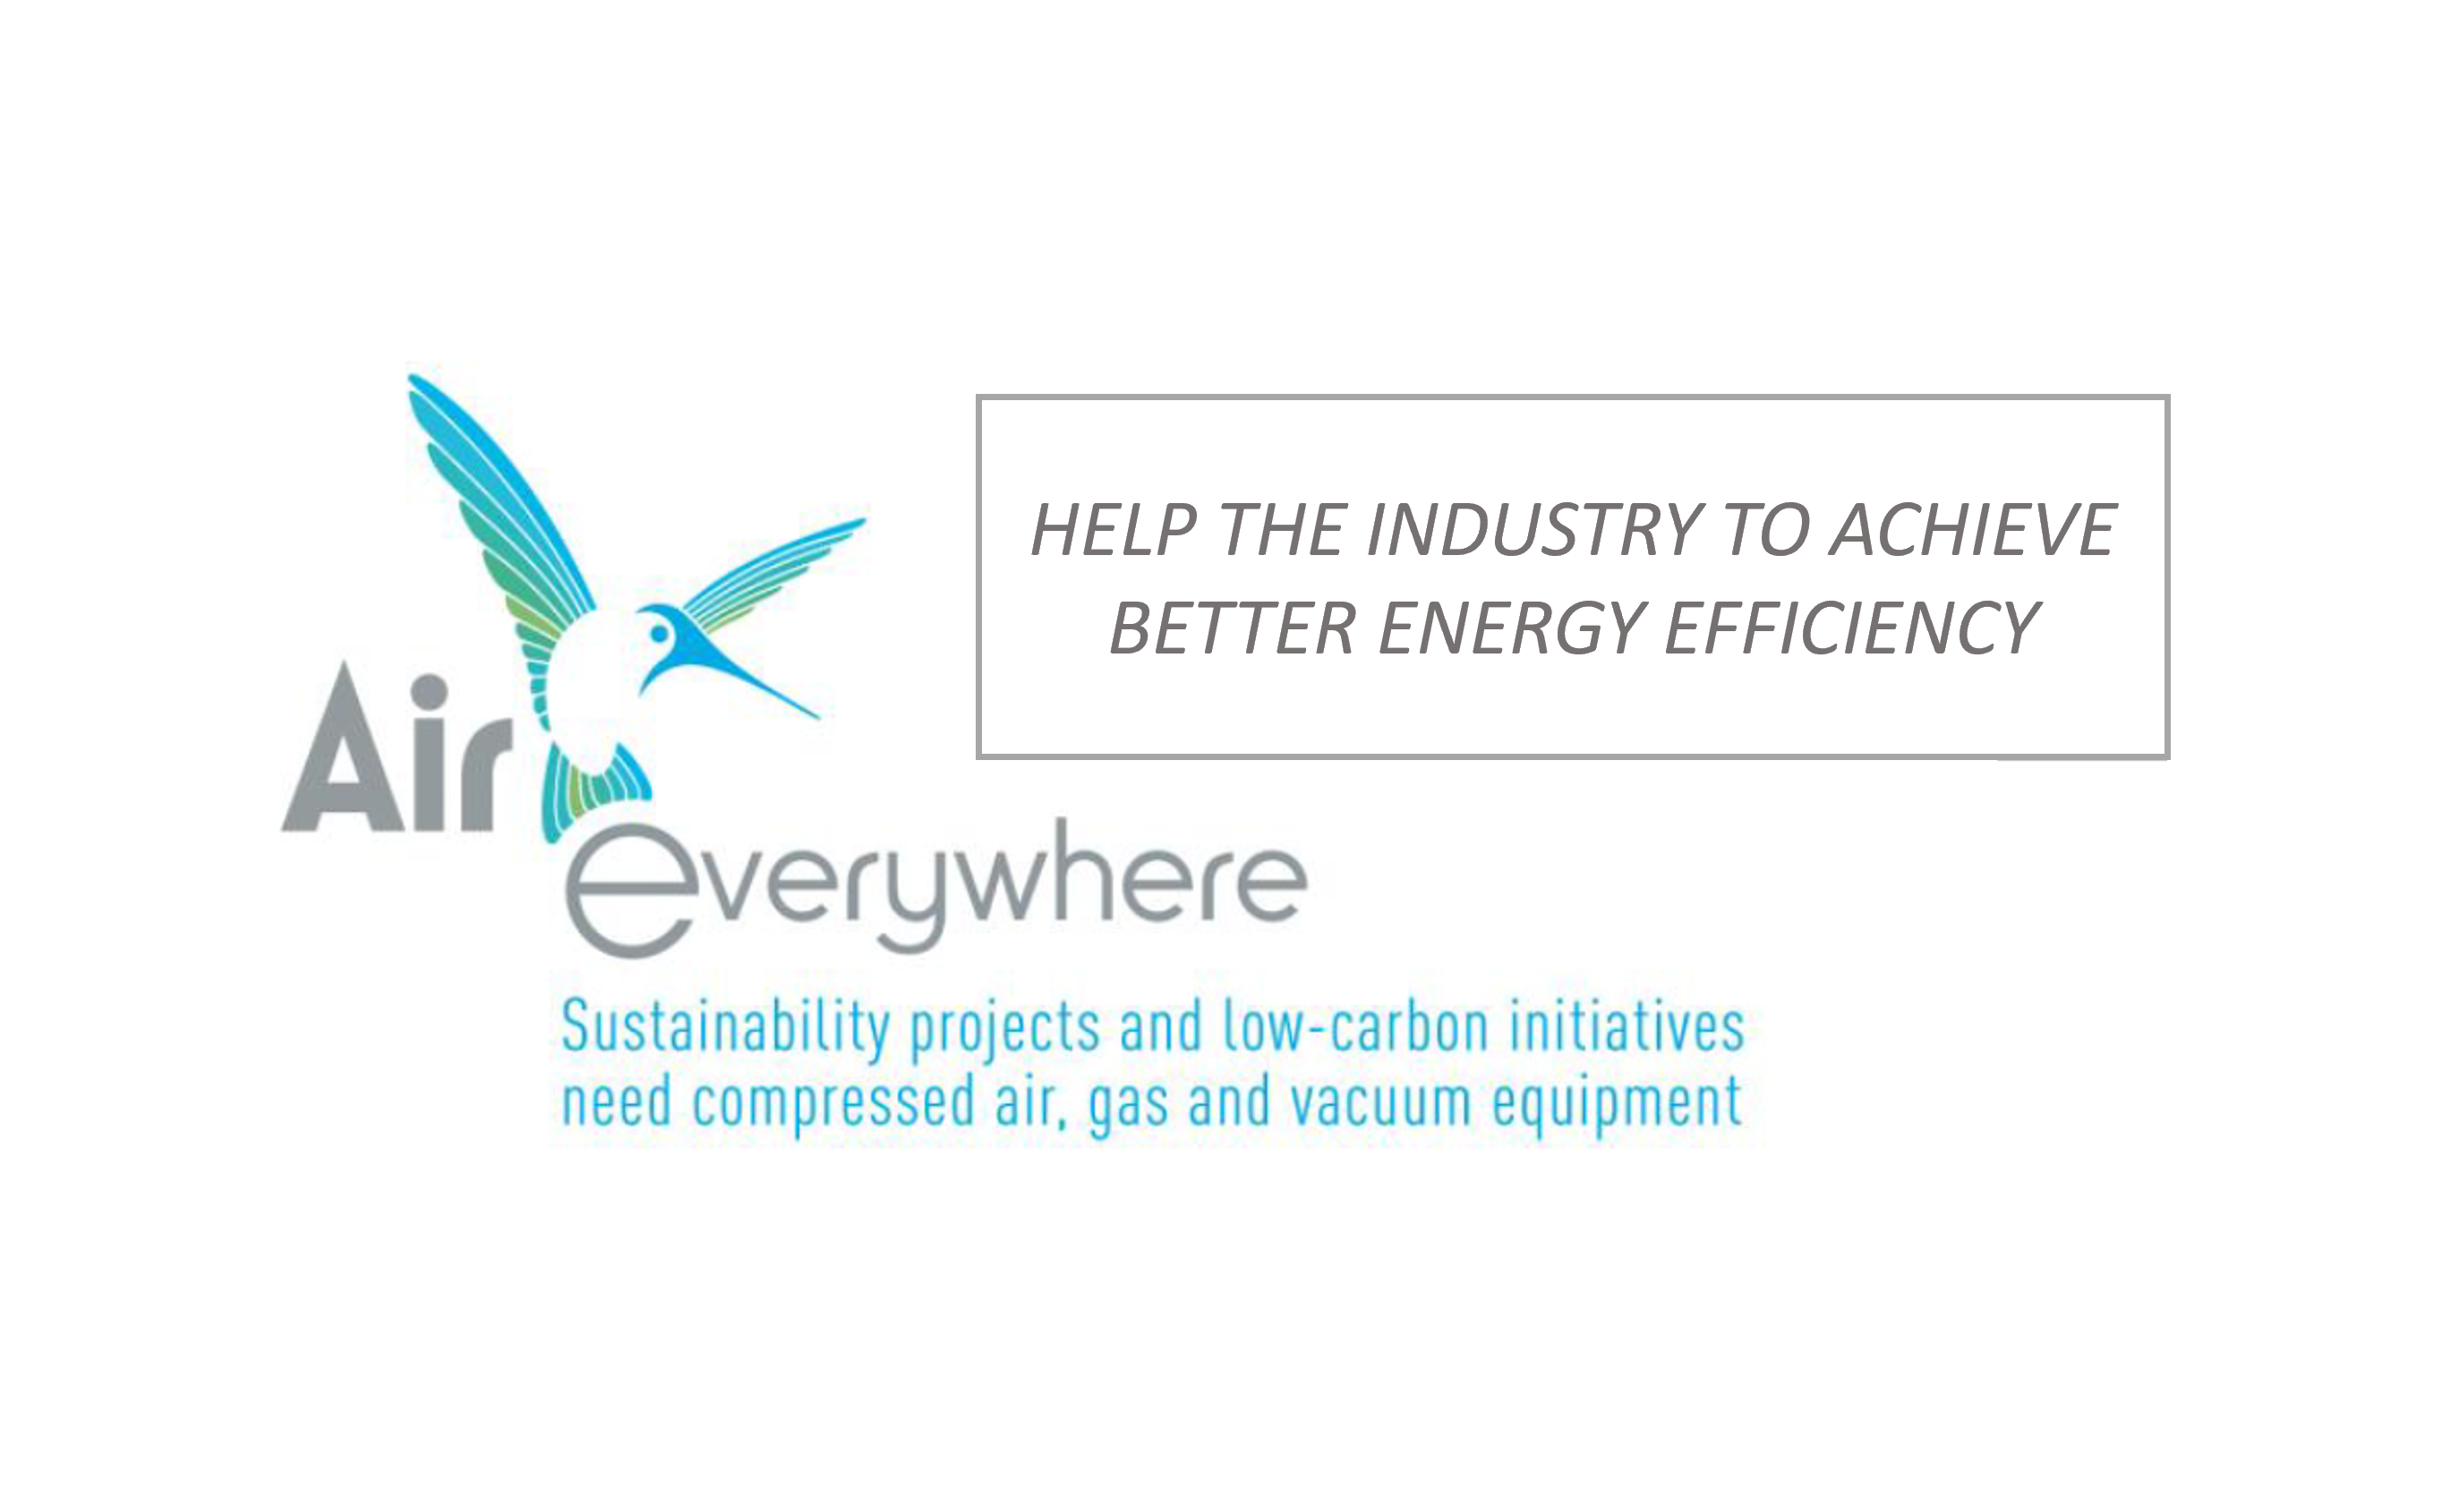 HELP THE INDUSTRY TO ACHIEVE BETTER ENERGY EFFICIENCY